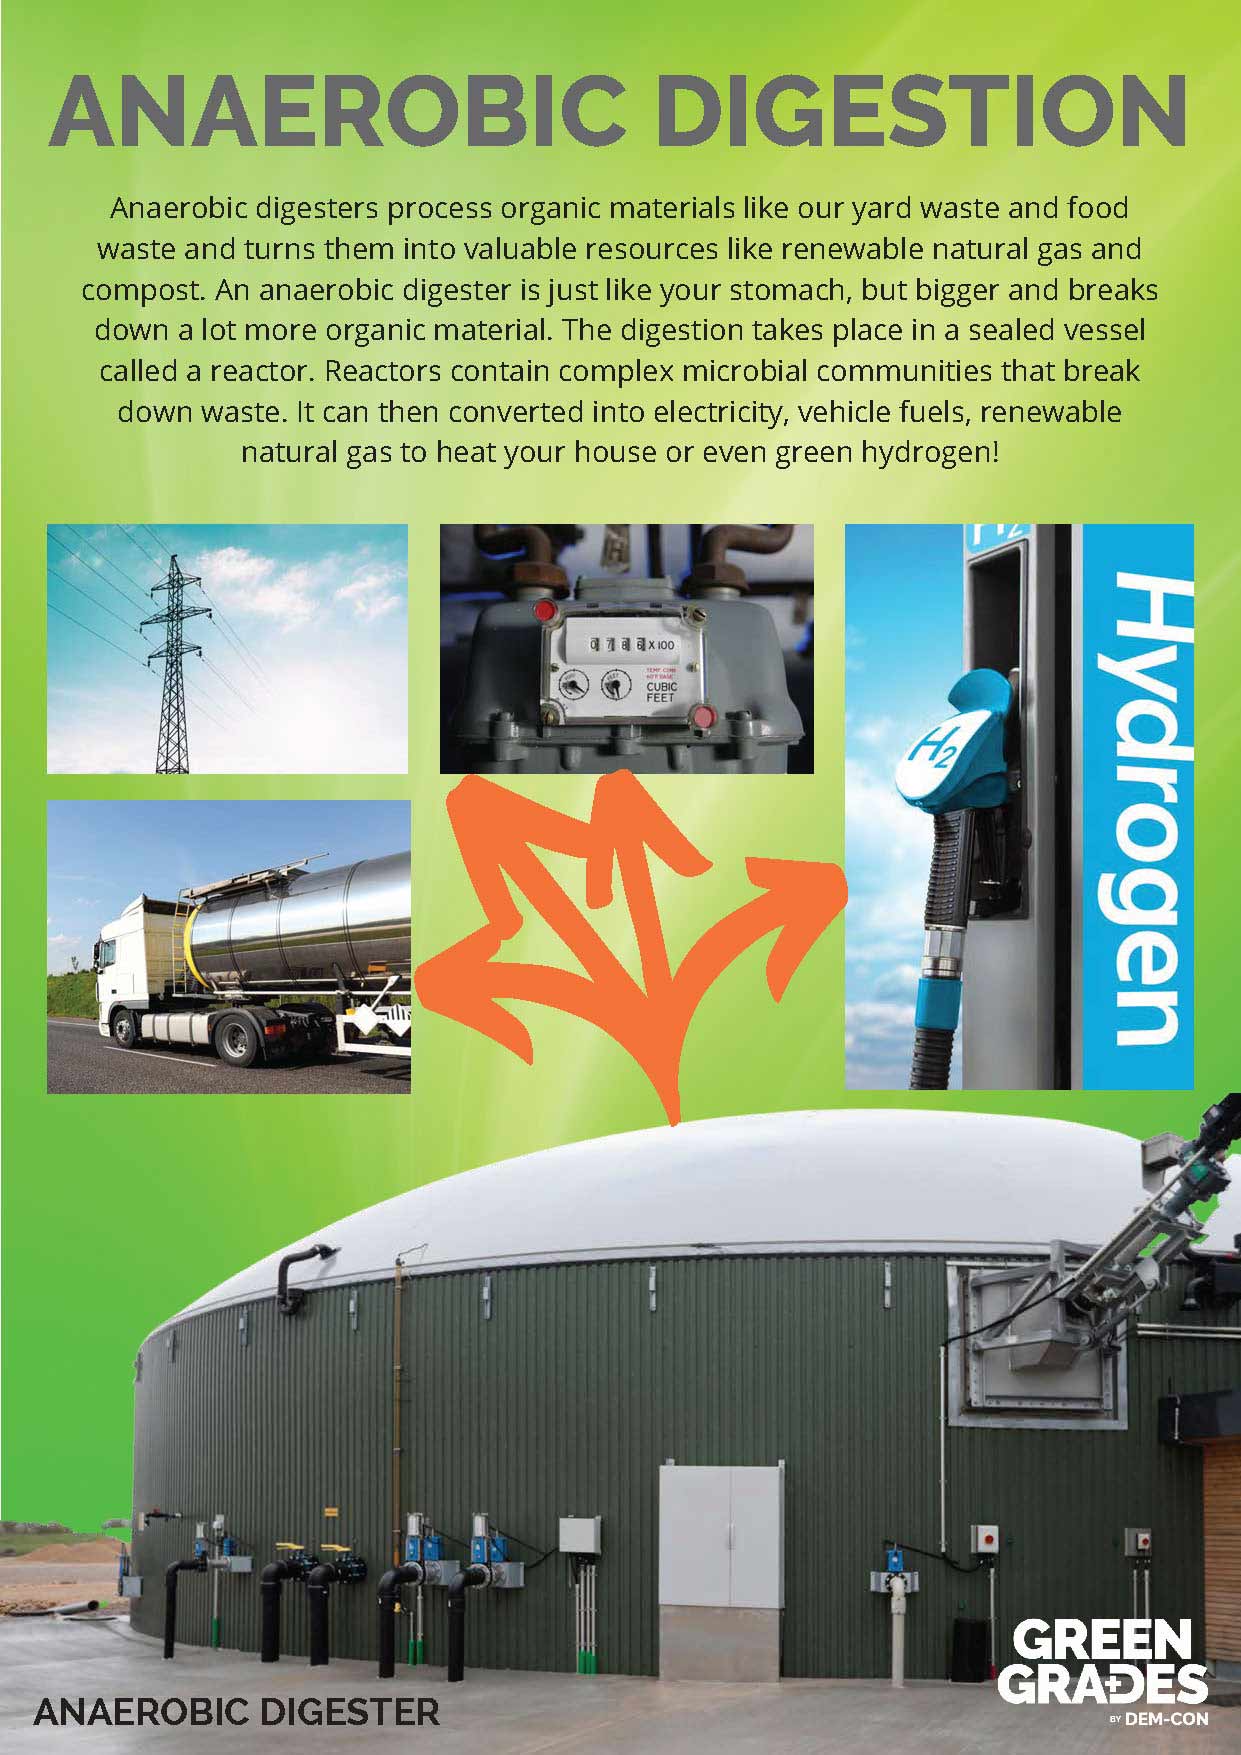 A flyer on the anaerobic digestion process